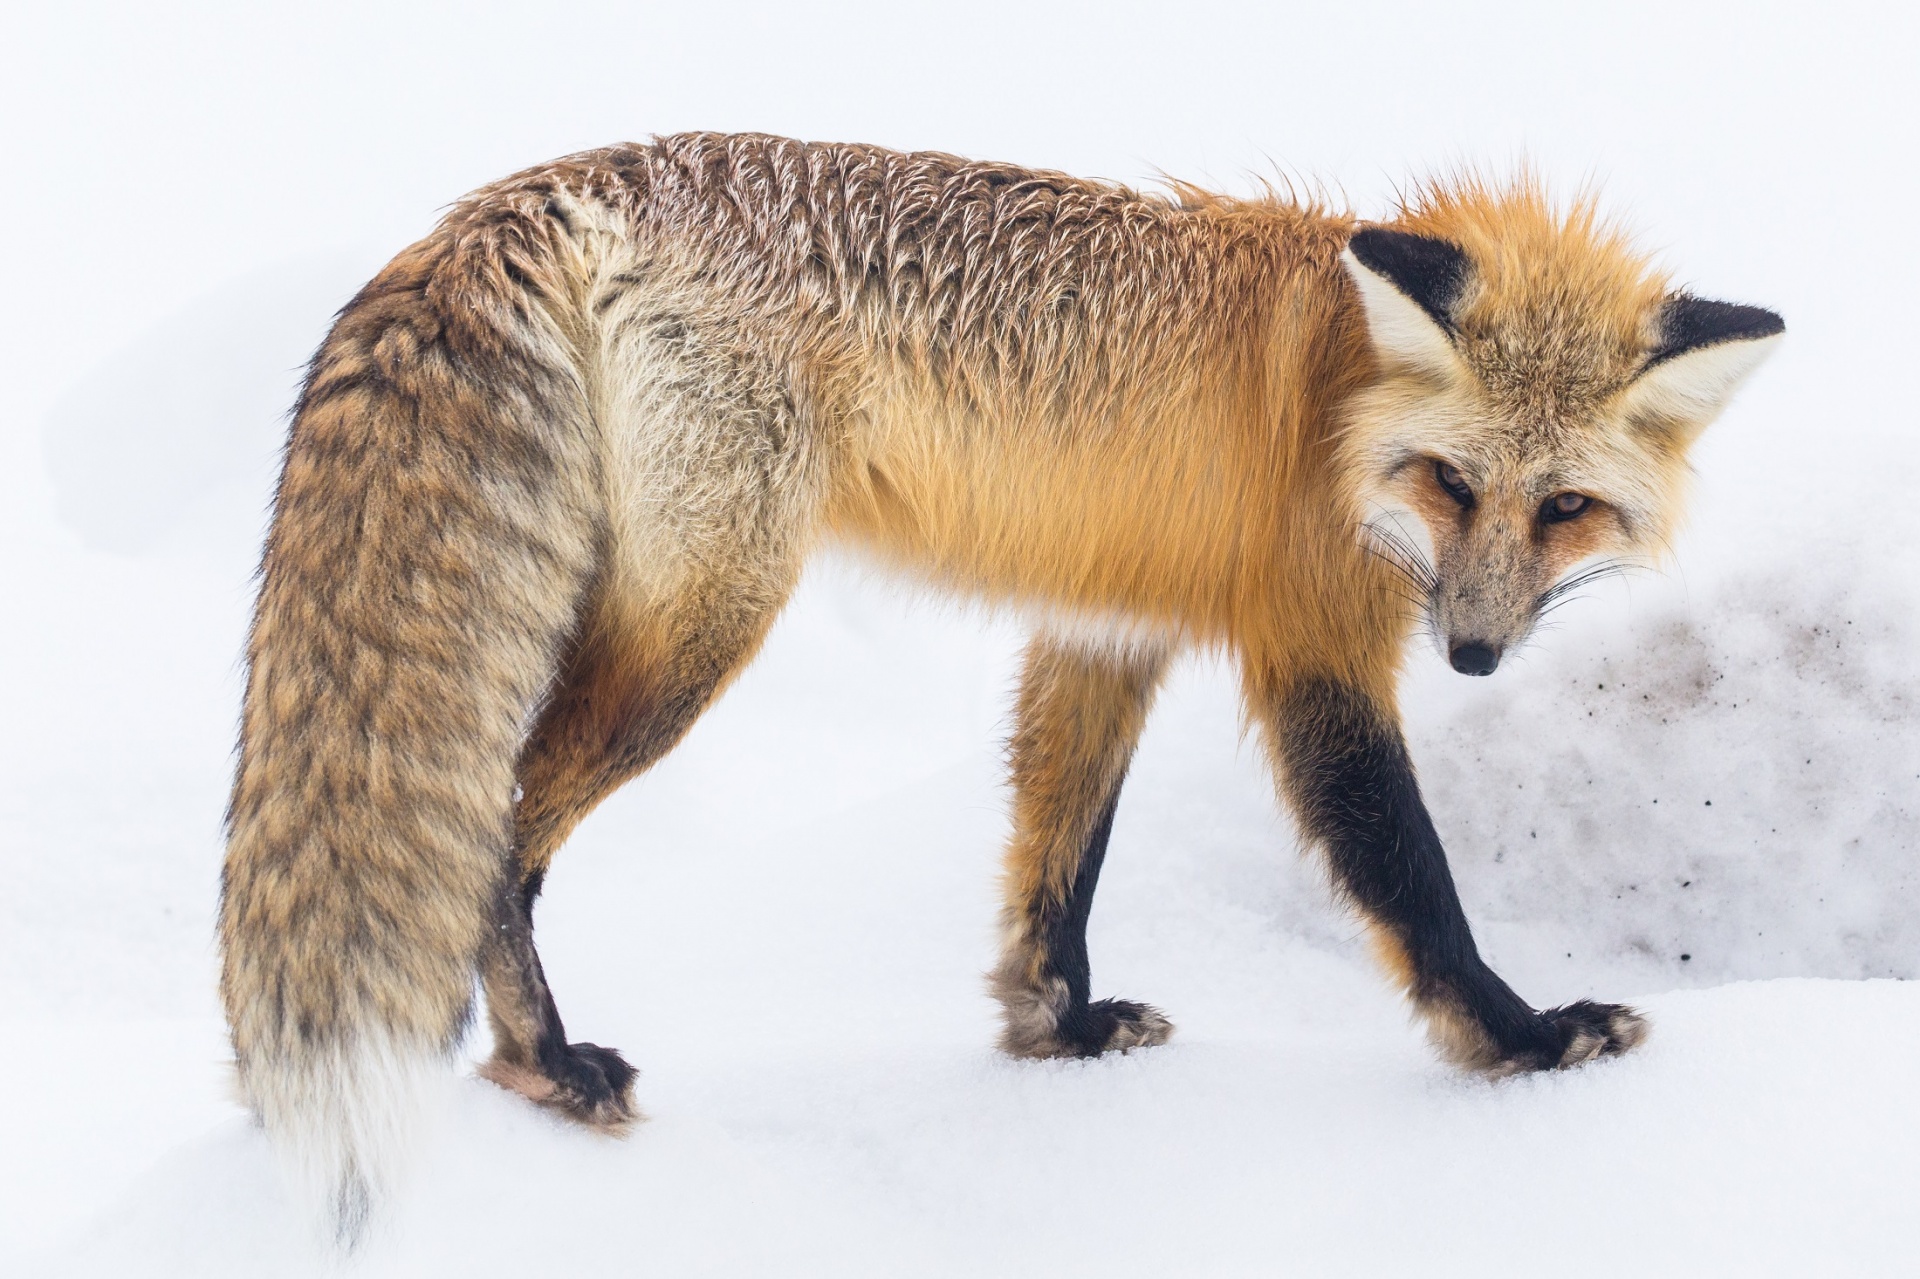 red-fox-free-stock-photo-public-domain-pictures